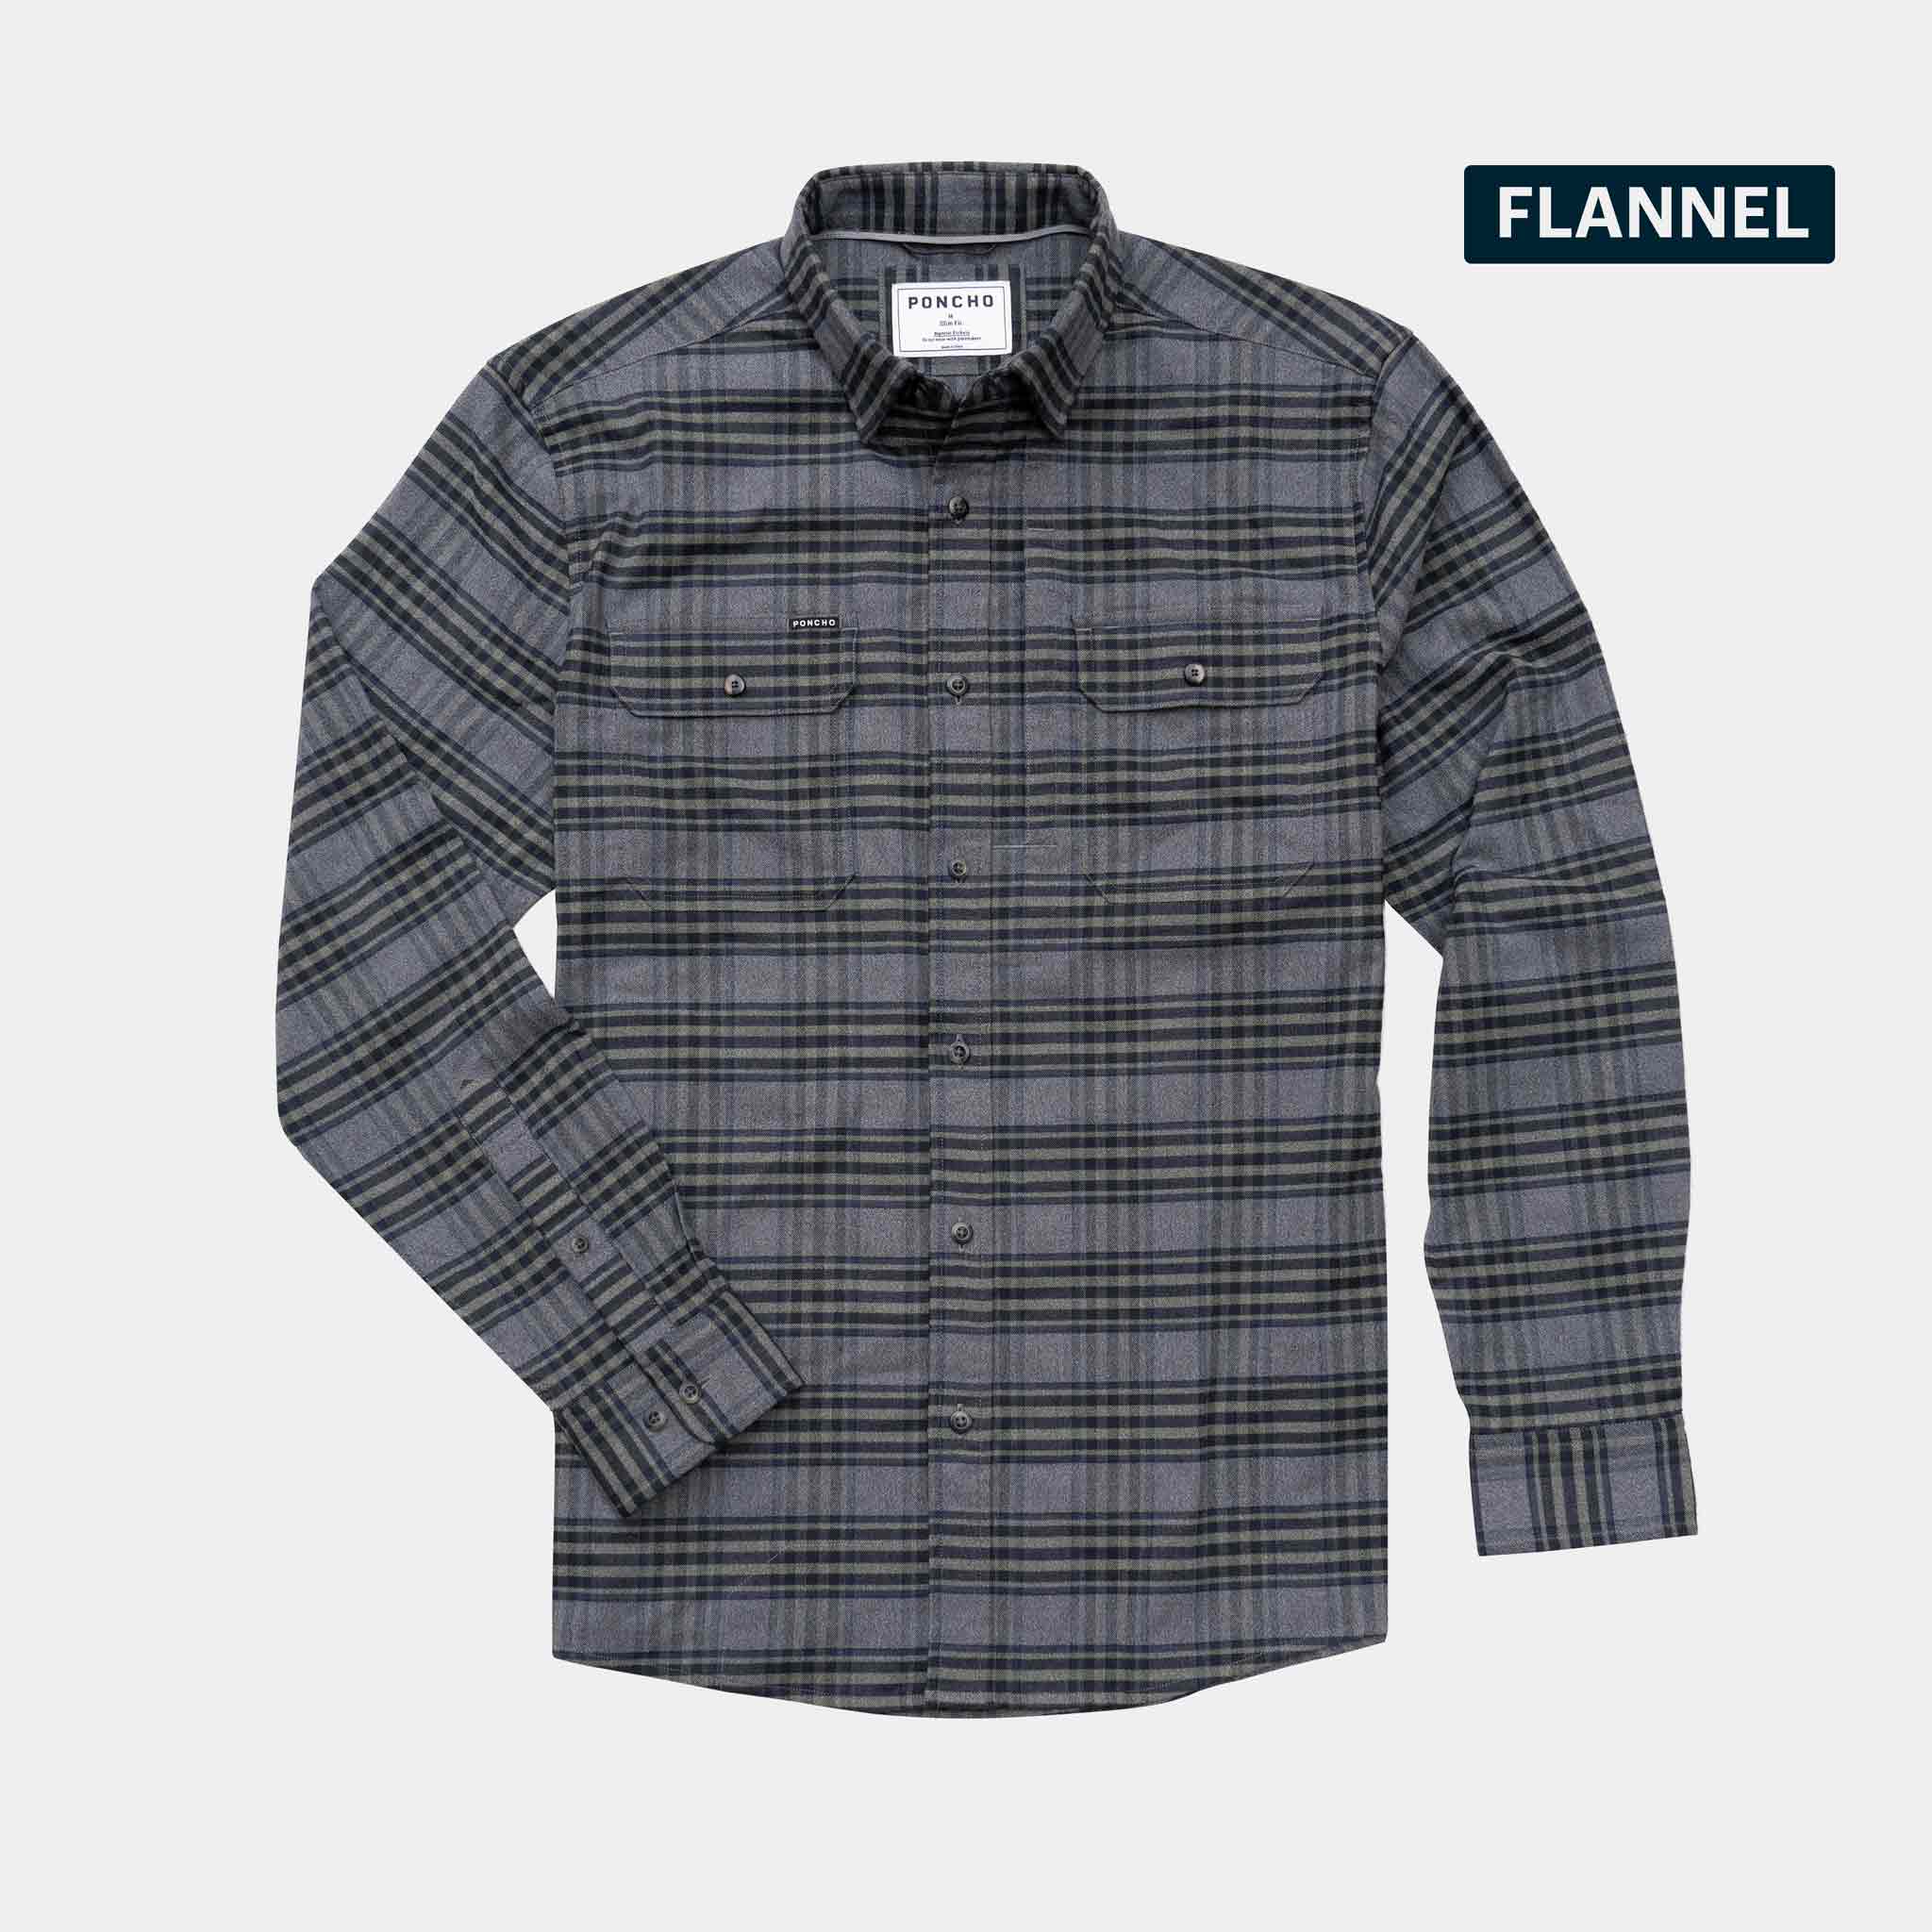 Product image of the Kenai shirt, a plaid flannel with grey and olive fabric